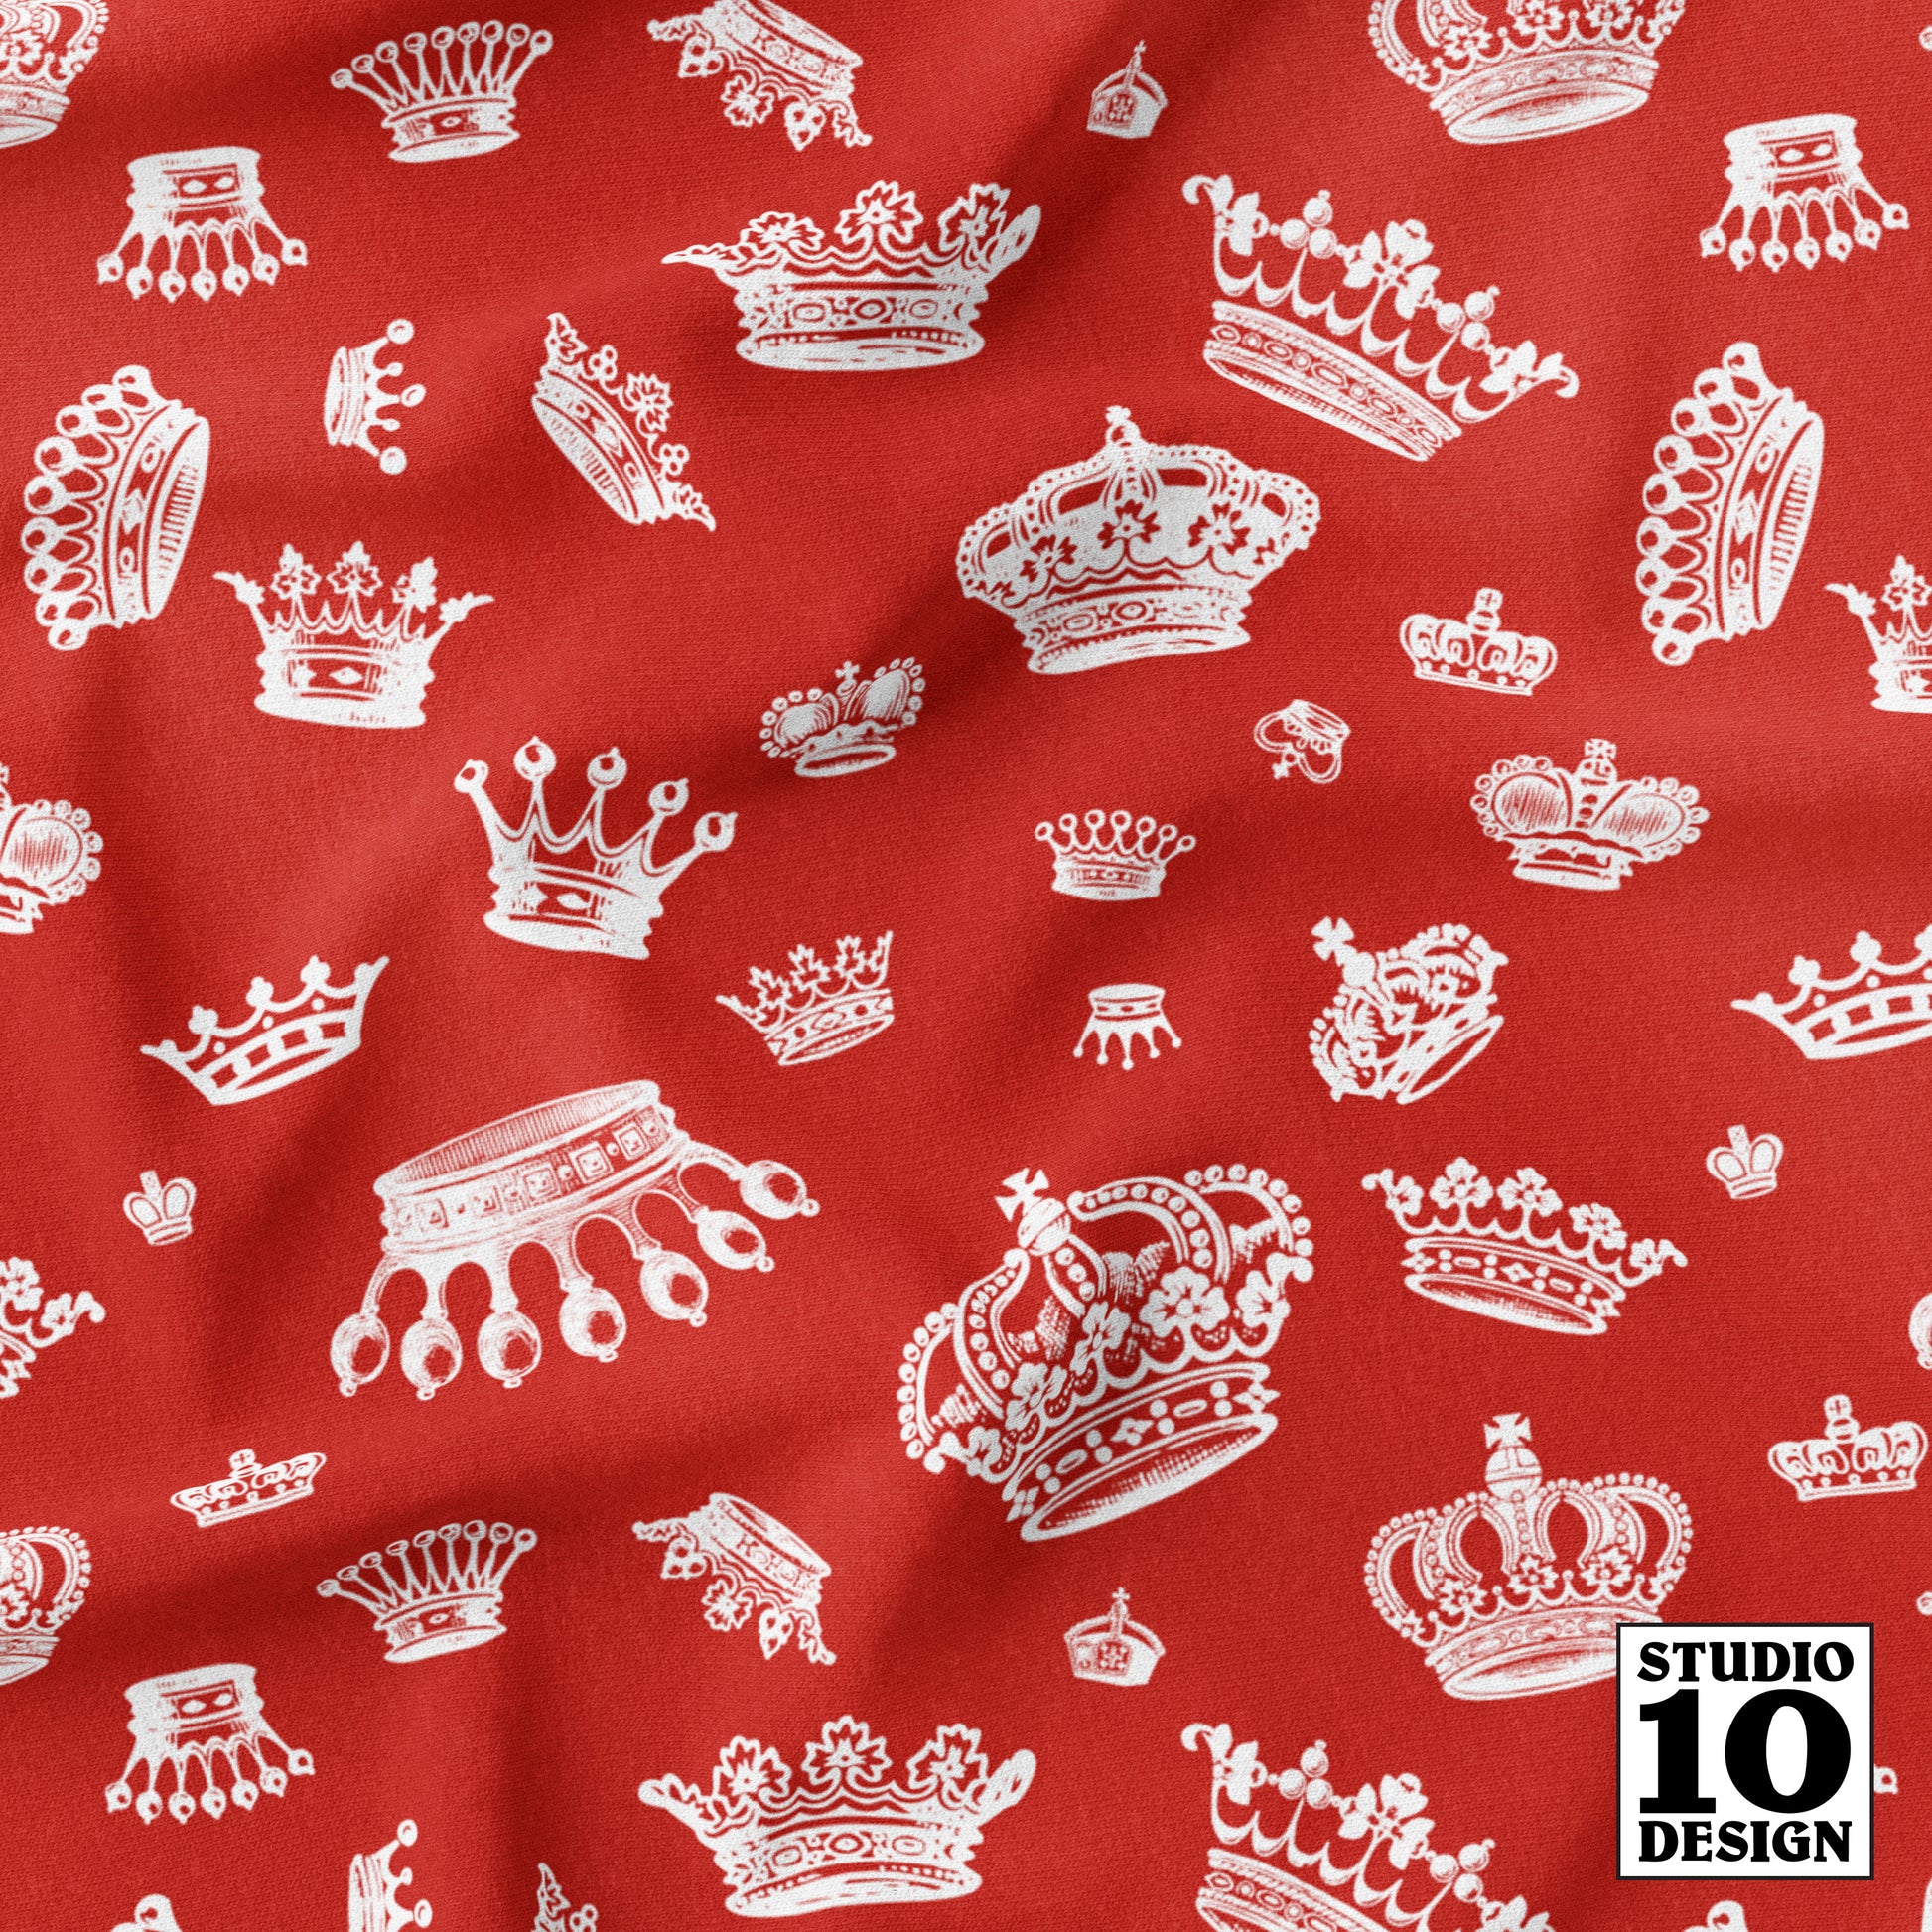 Royal Crowns White+Poppy Red Printed Fabric by Studio Ten Design